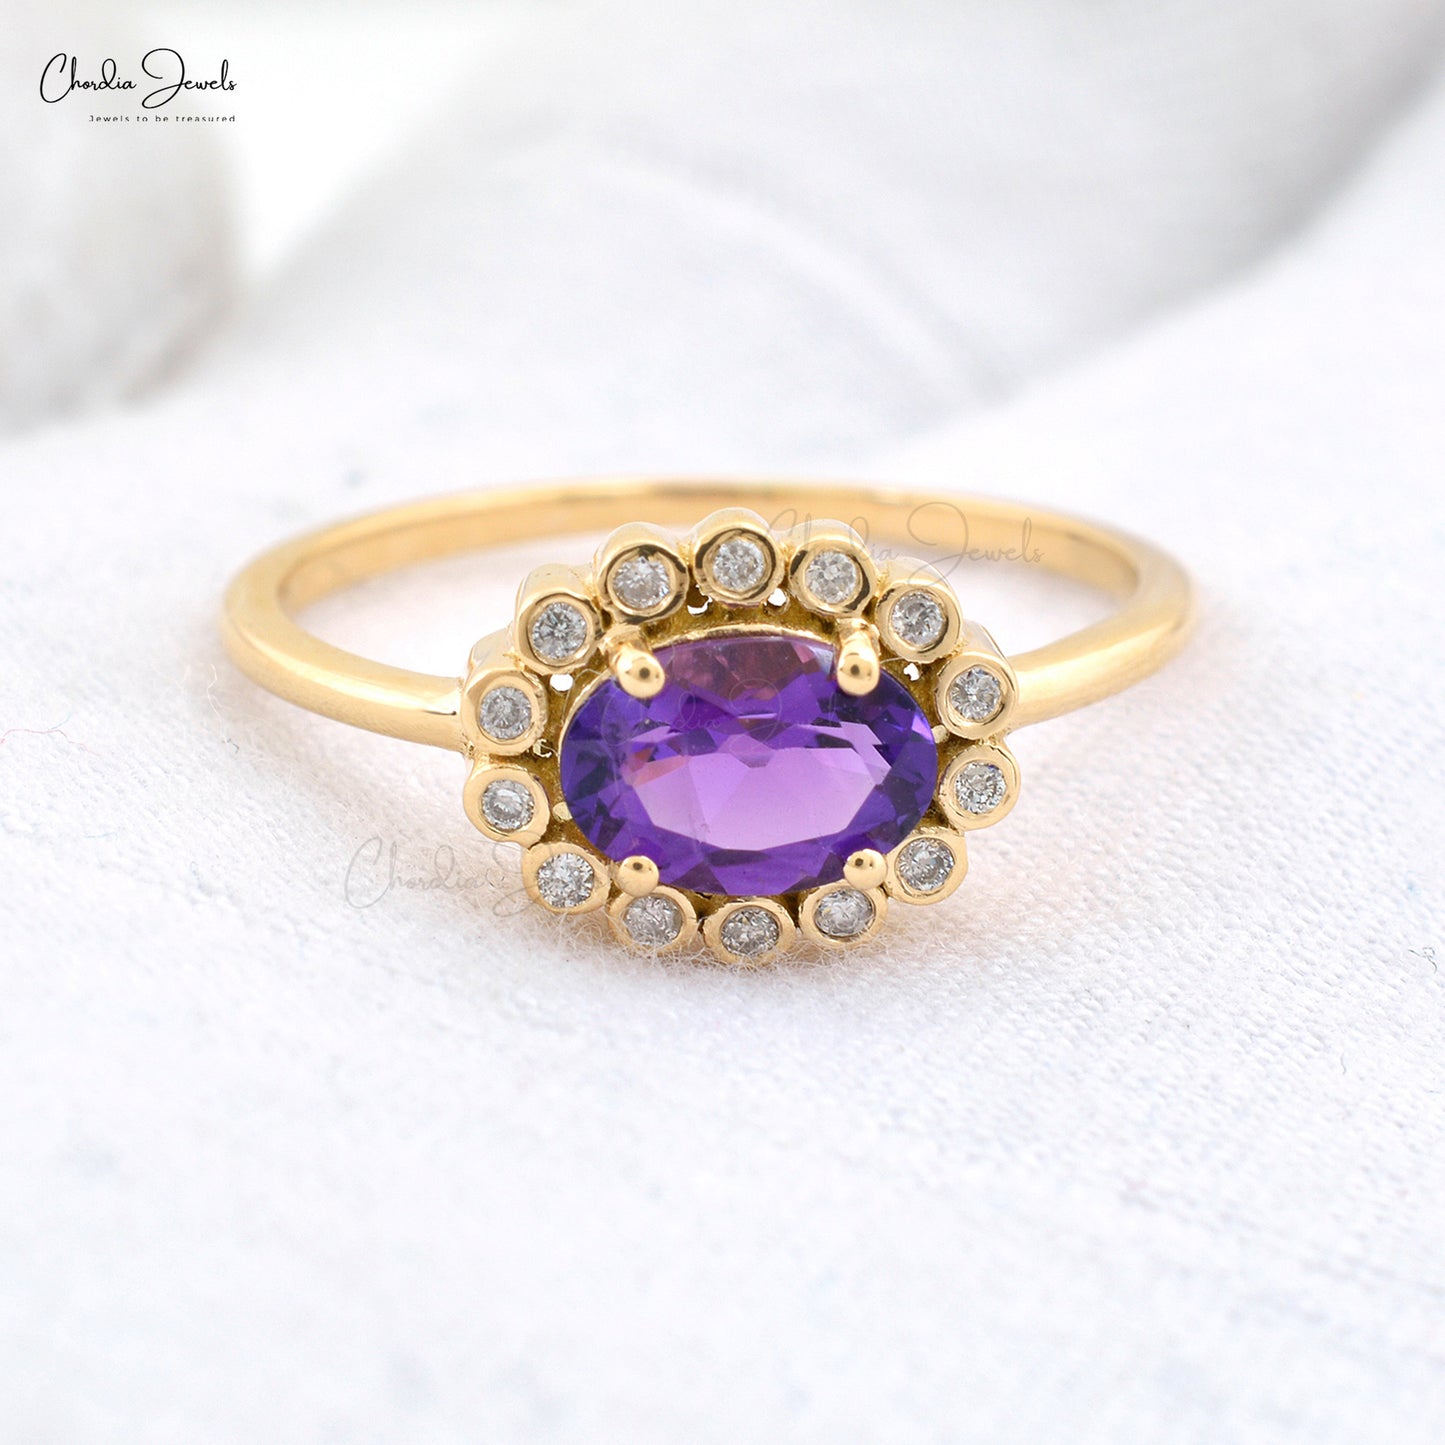 Stunning 14k Real Gold Promise Ring Genuine 0.72CT Amethyst with Diamond Halo Dainty Ring